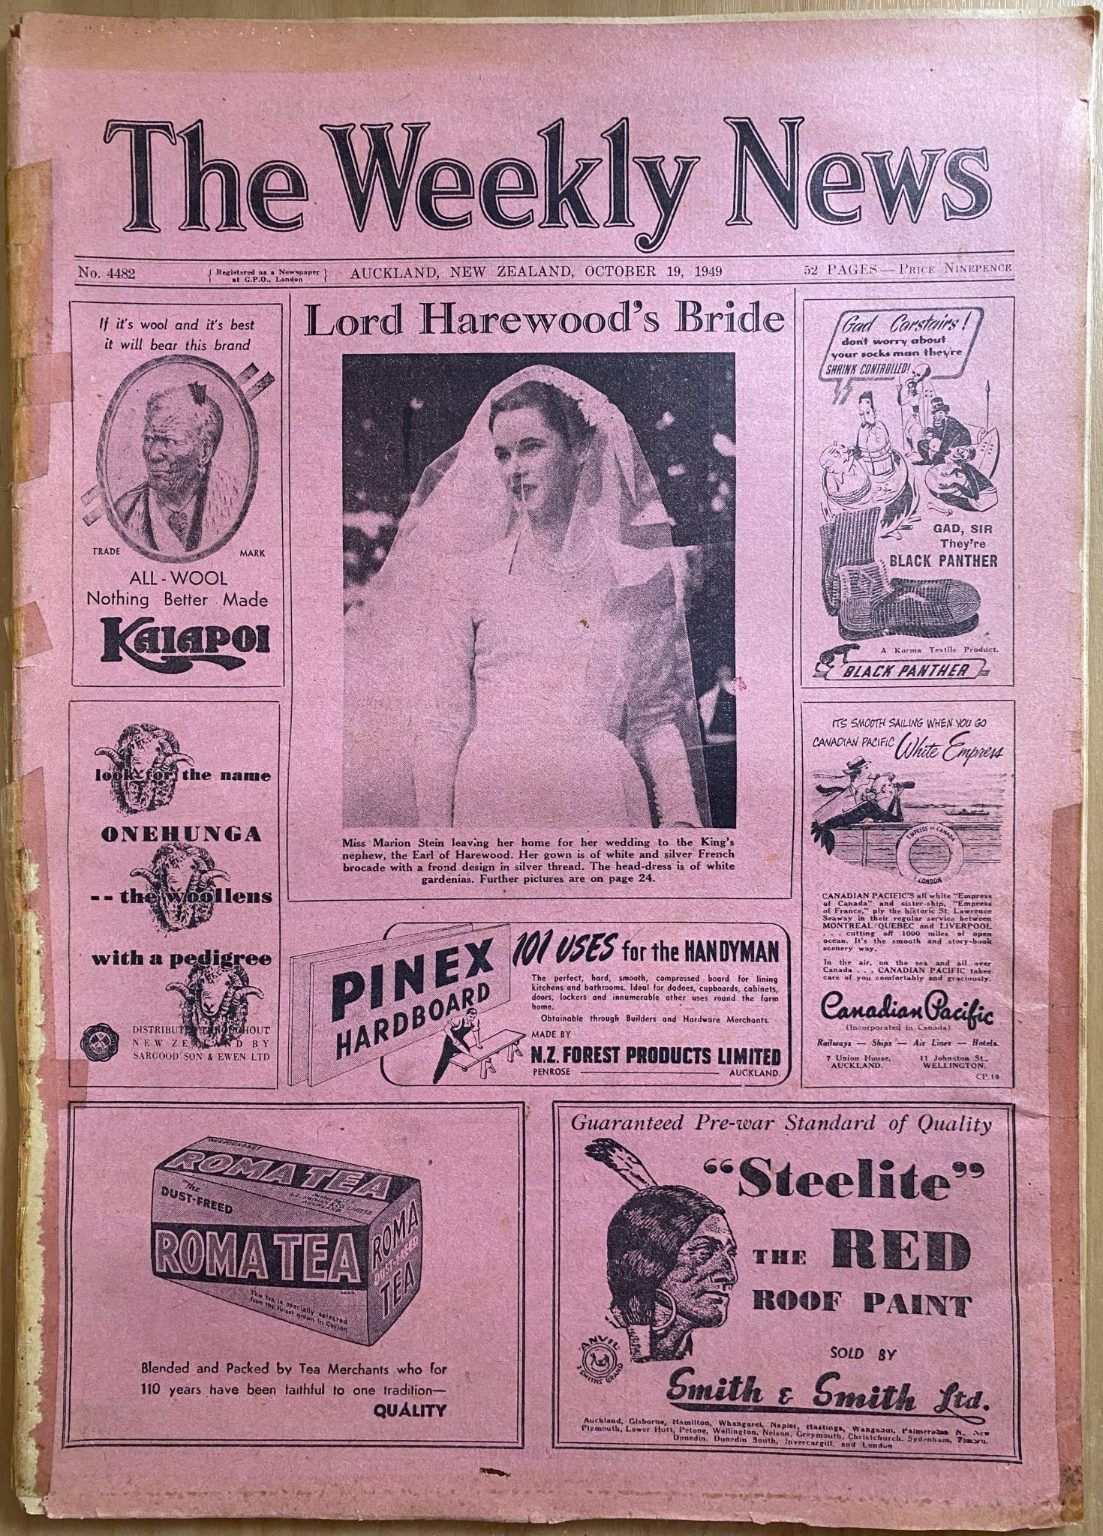 OLD NEWSPAPER: The Weekly News, No. 4482, 19 October 1949